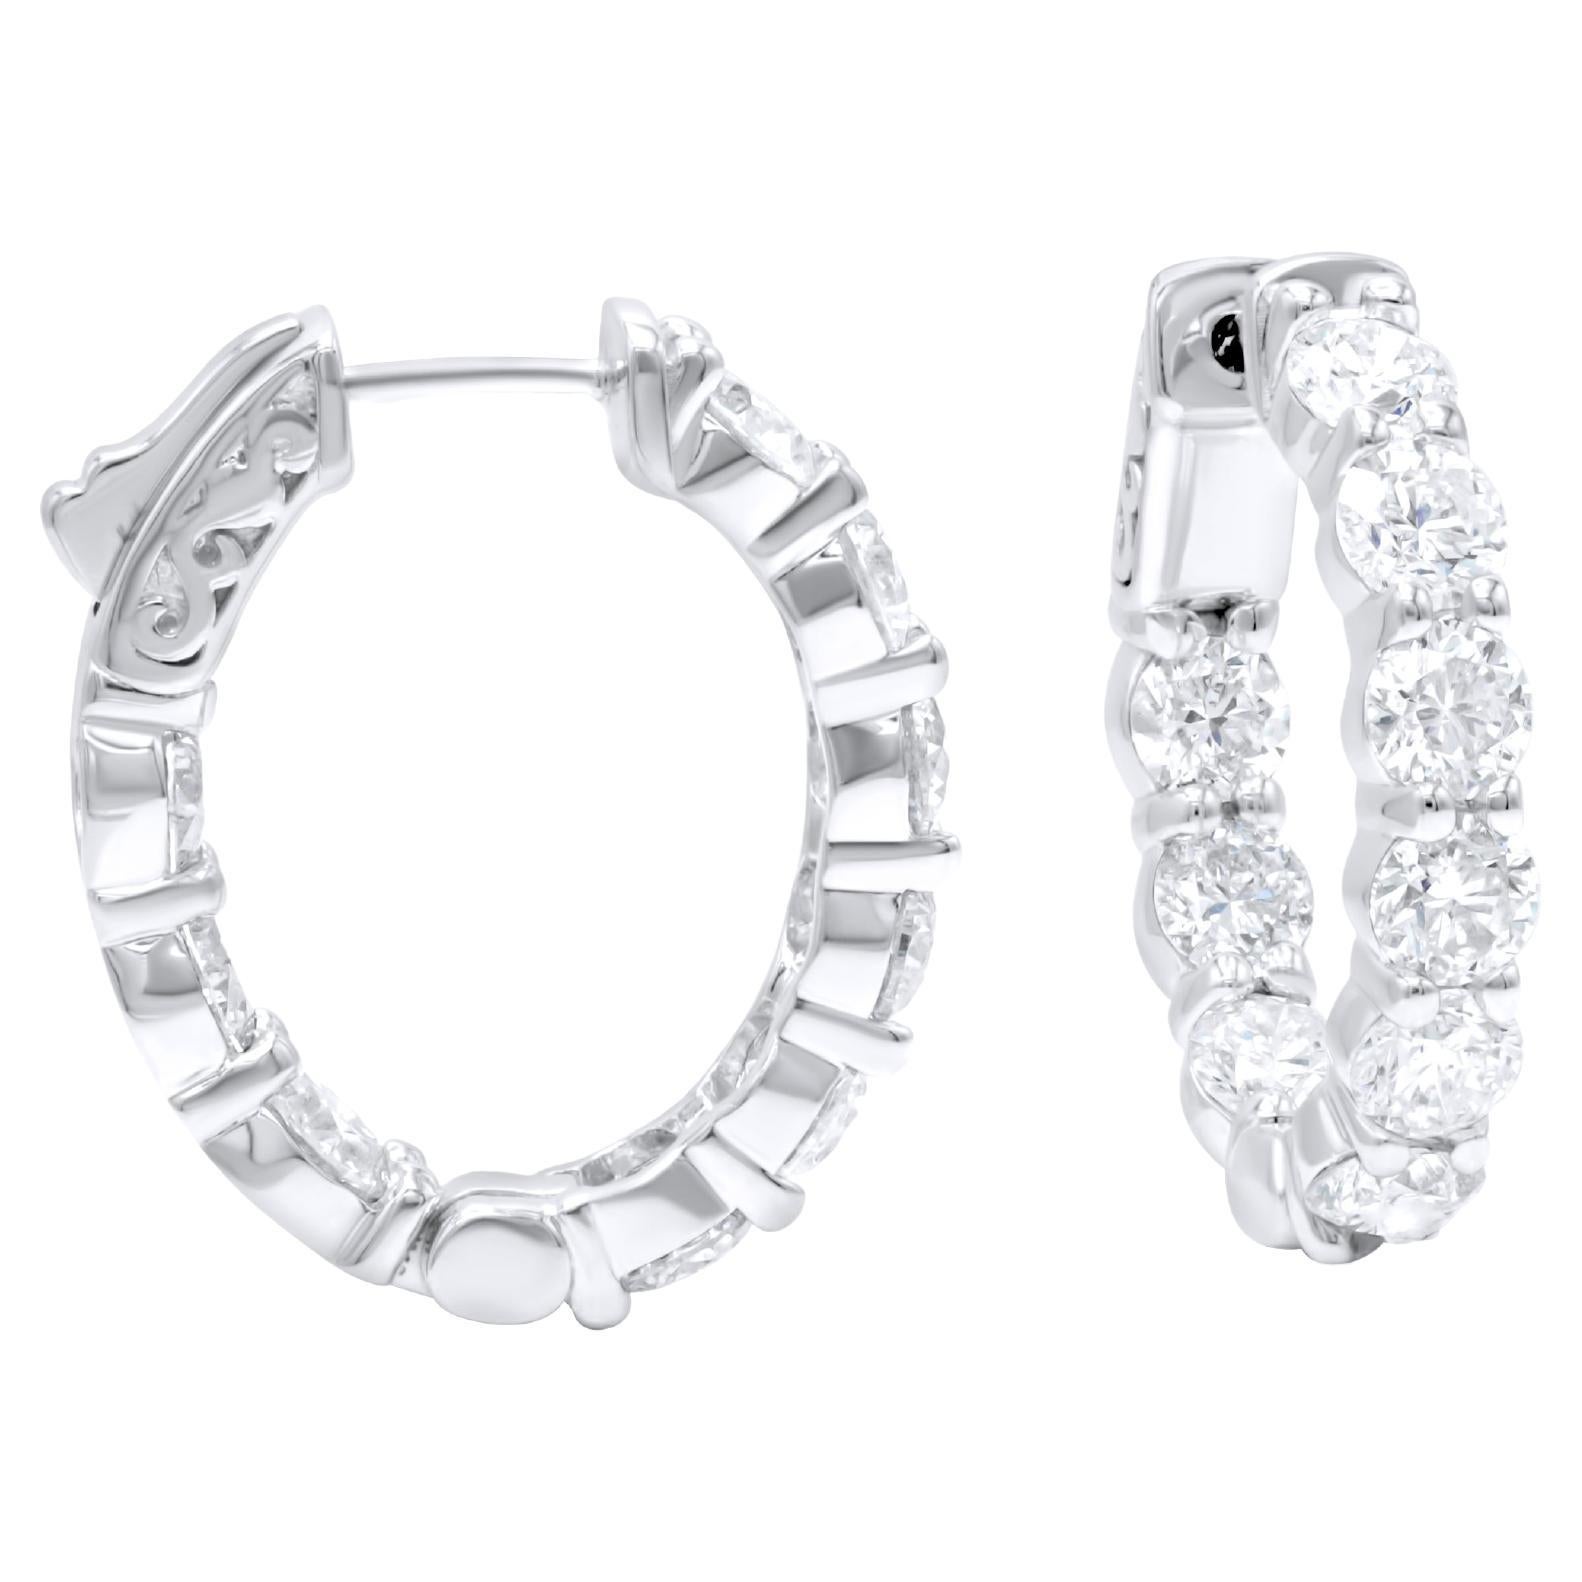 Diana M. 18 kt white gold, 0.75" inside-out hoop earrings adorned with 4.55 cts 